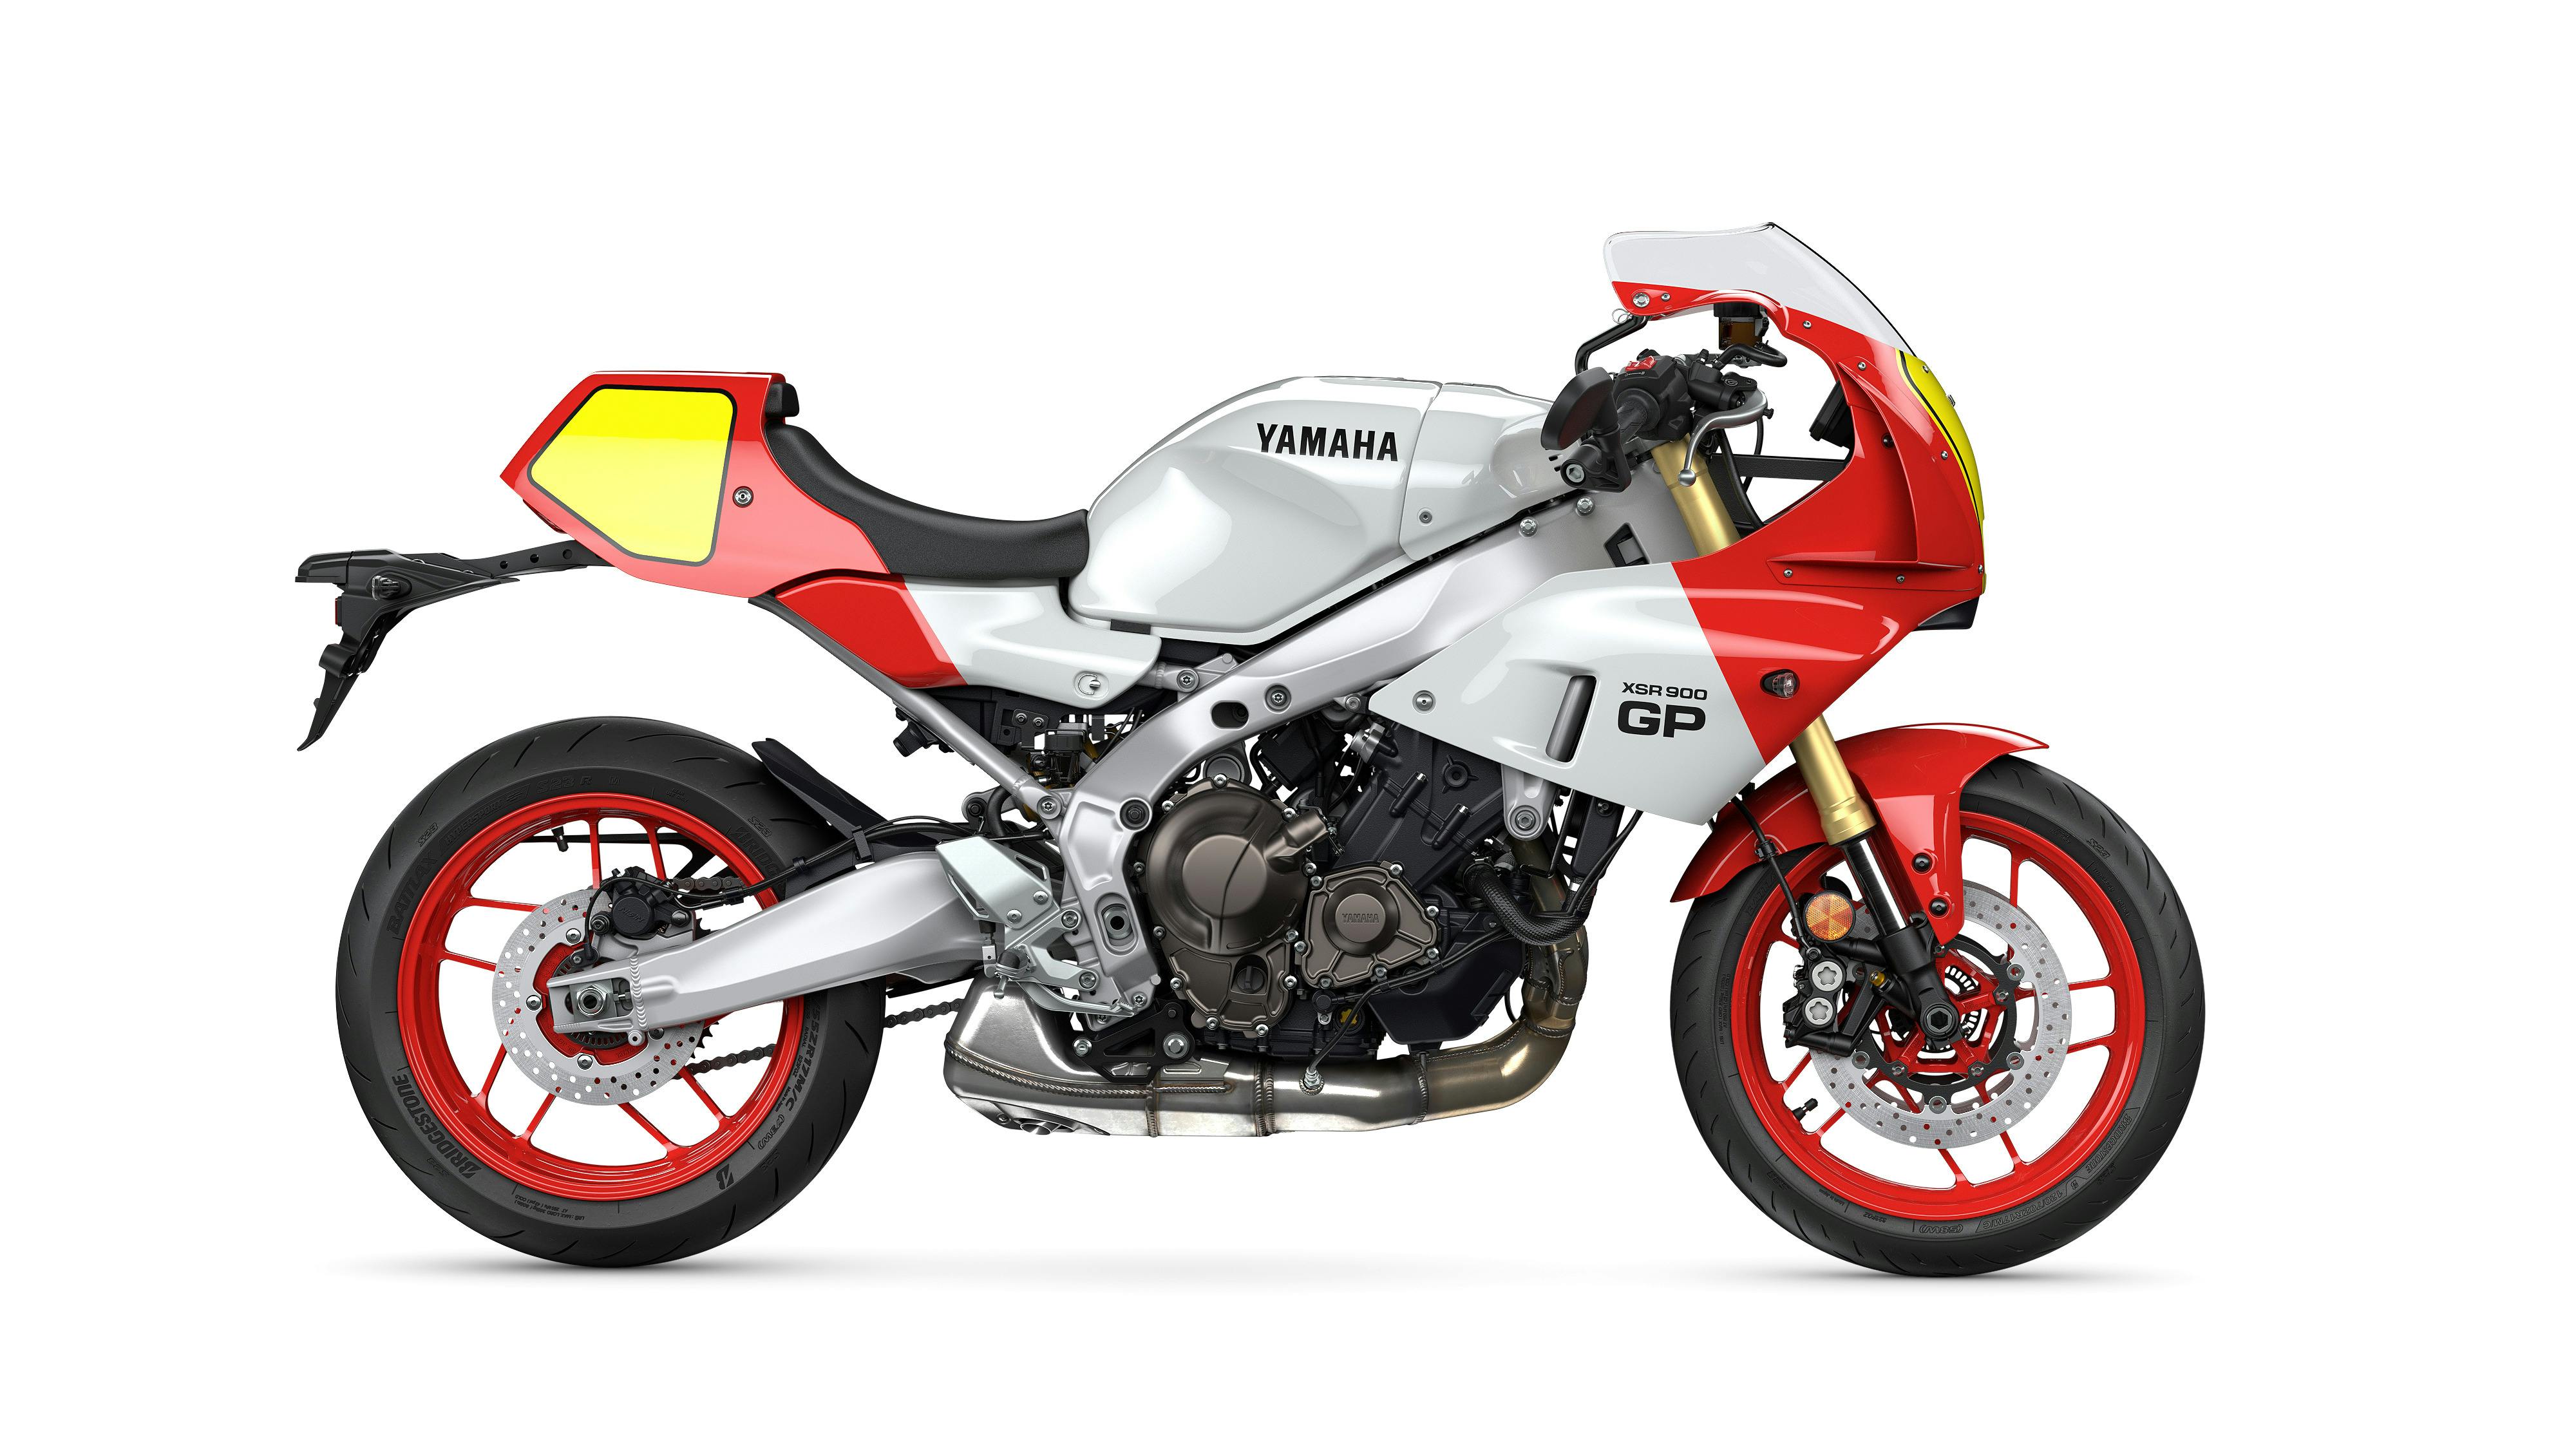 Yamaha XSR900 GP in legend red colour